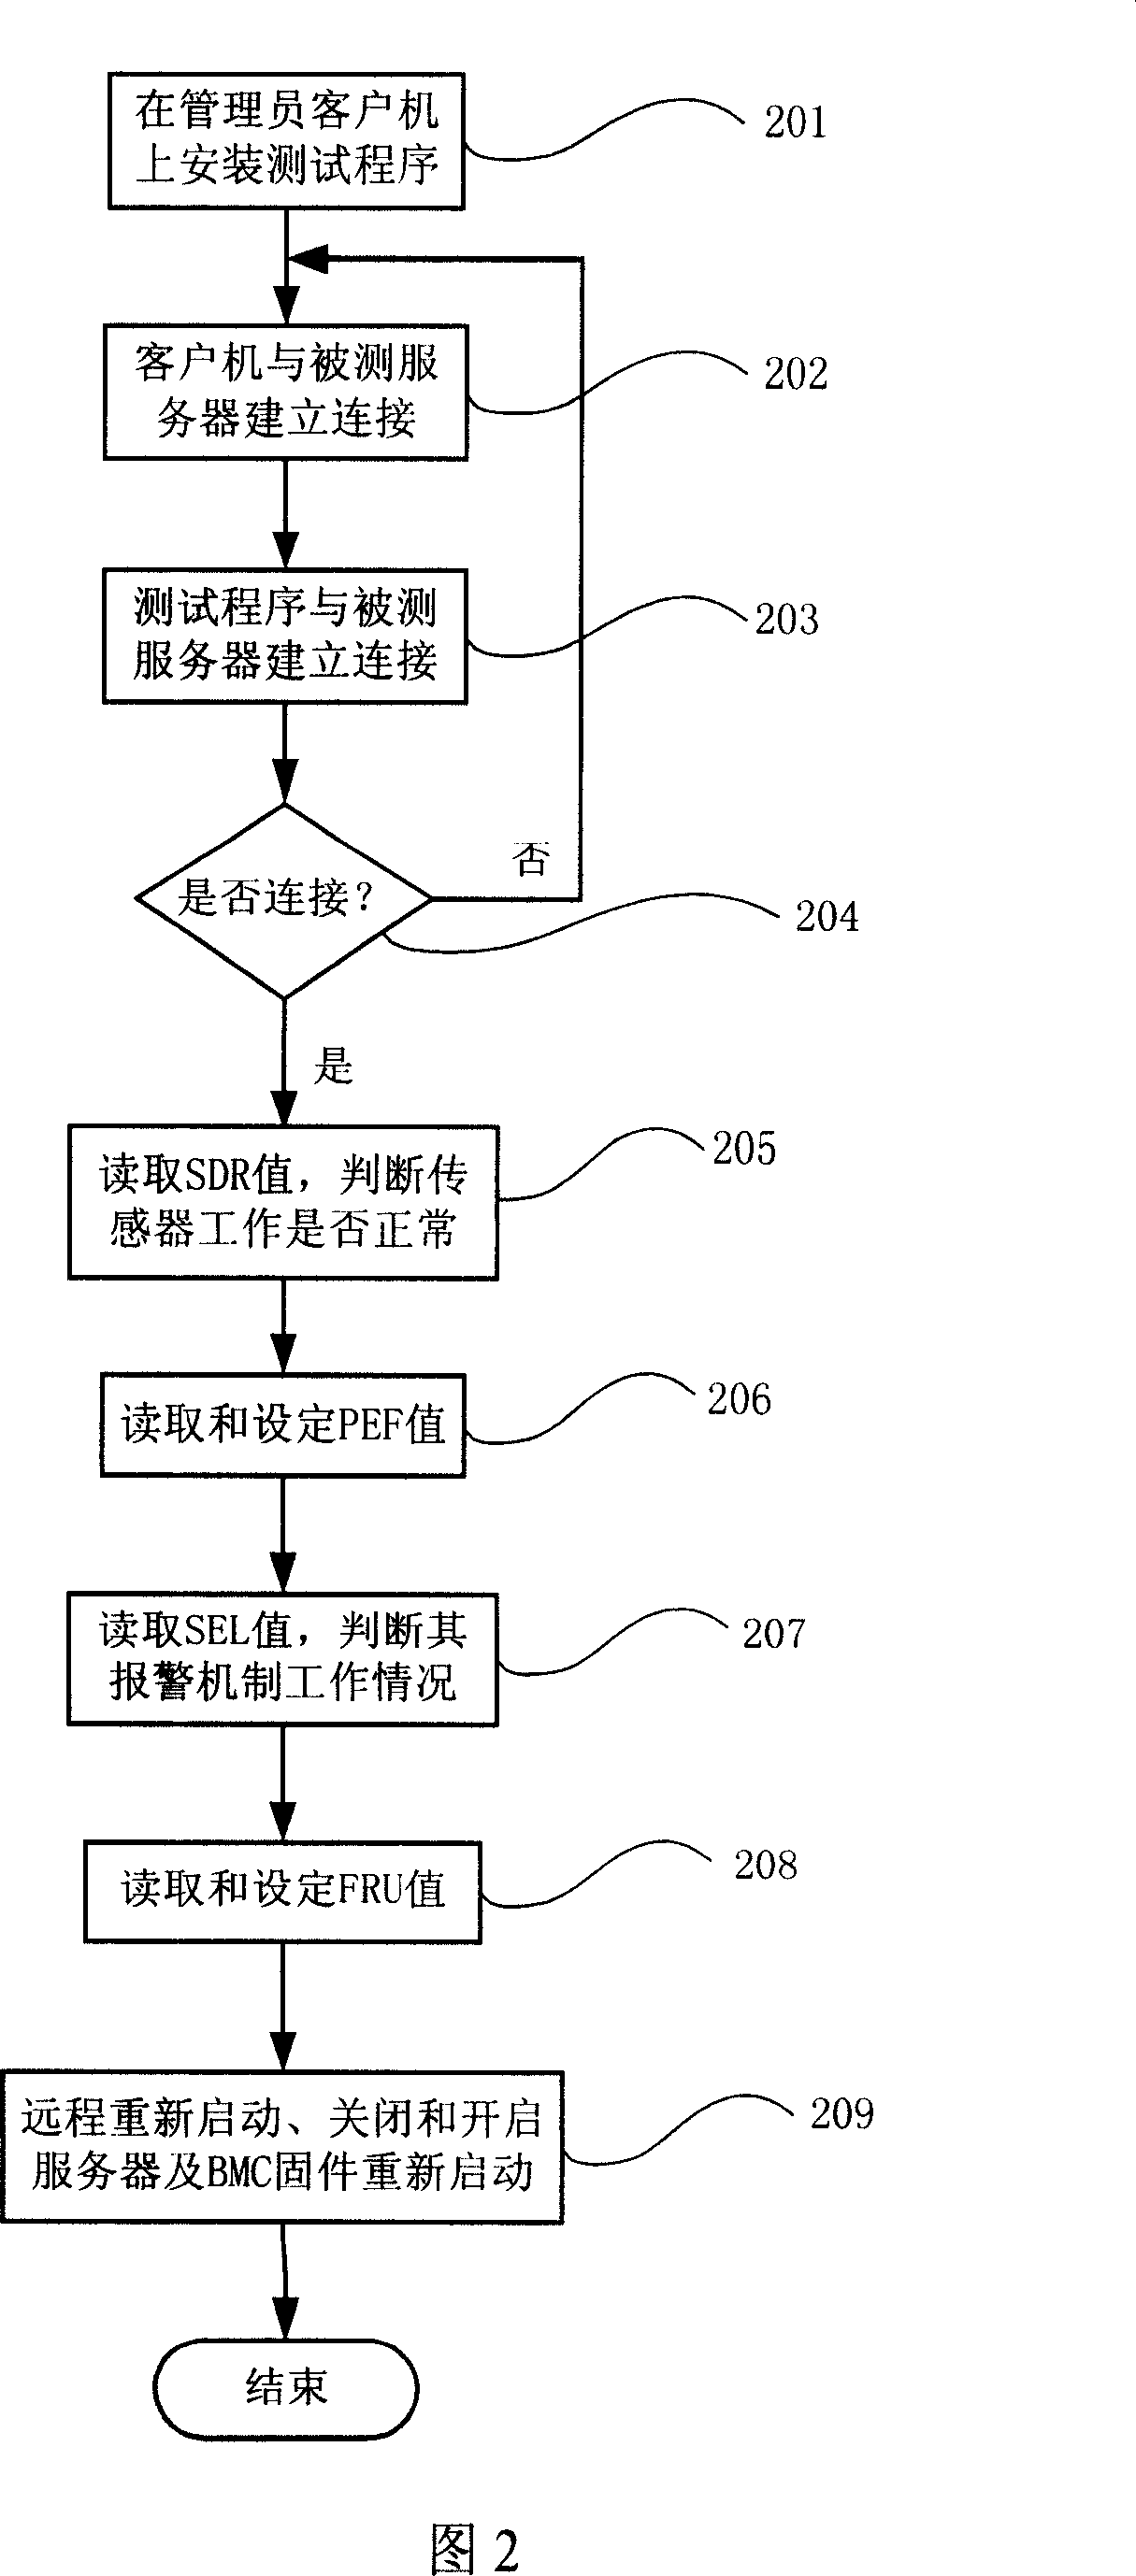 Remote based intellectual platform management interface testing system and method